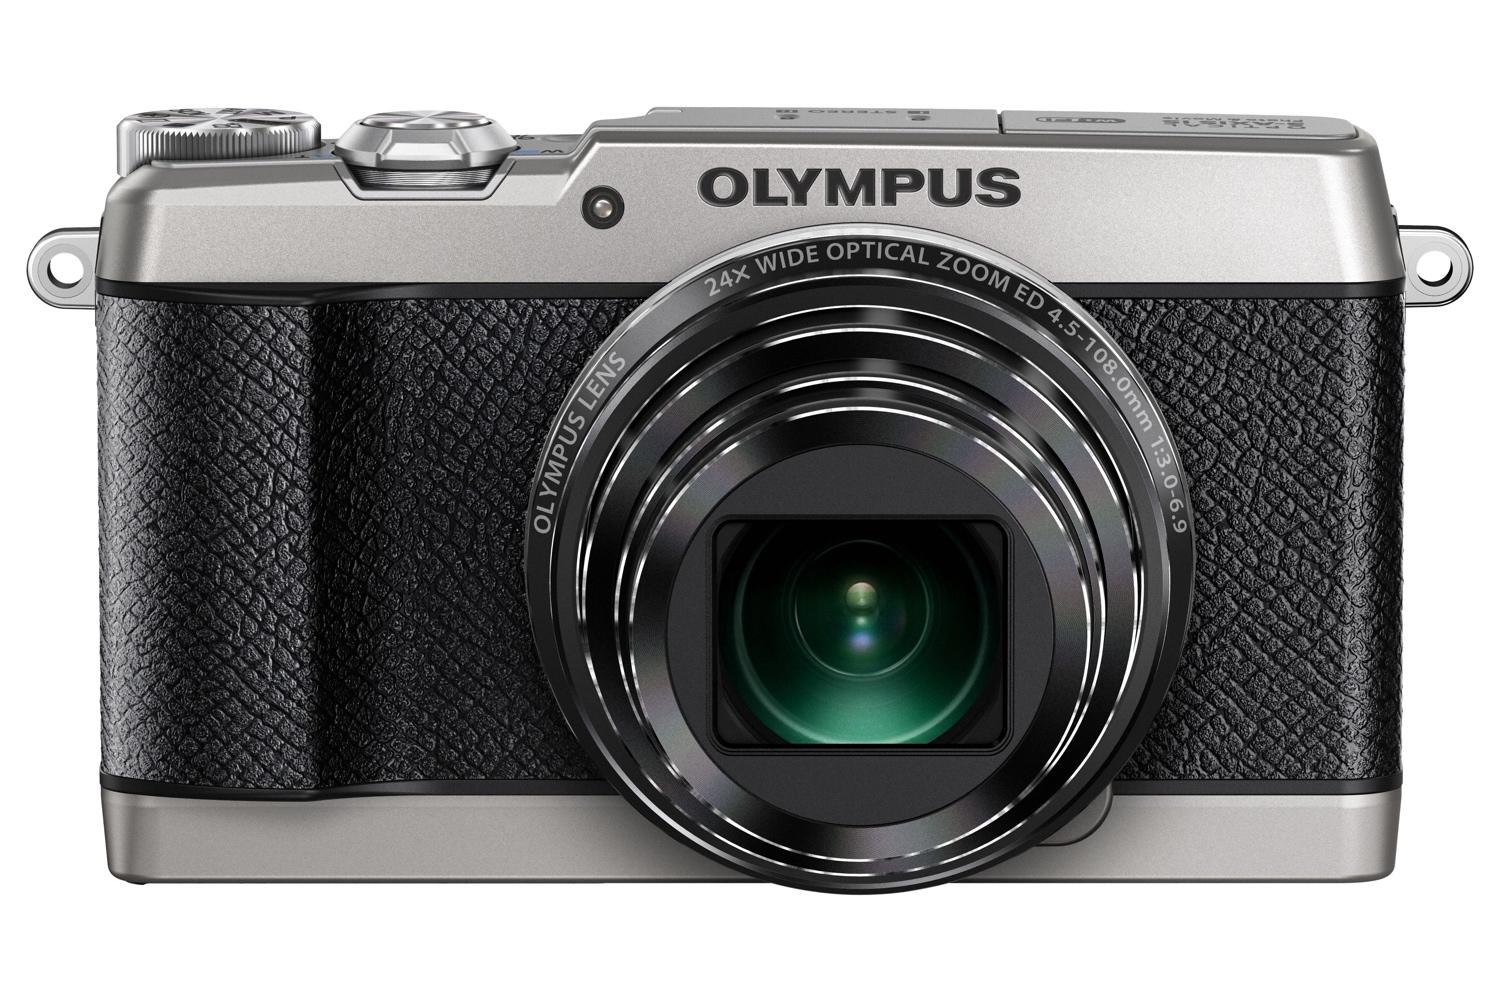 olympus stylus sh 2 compact camera retains 5 axis stabilization adds new night modes sh2 11